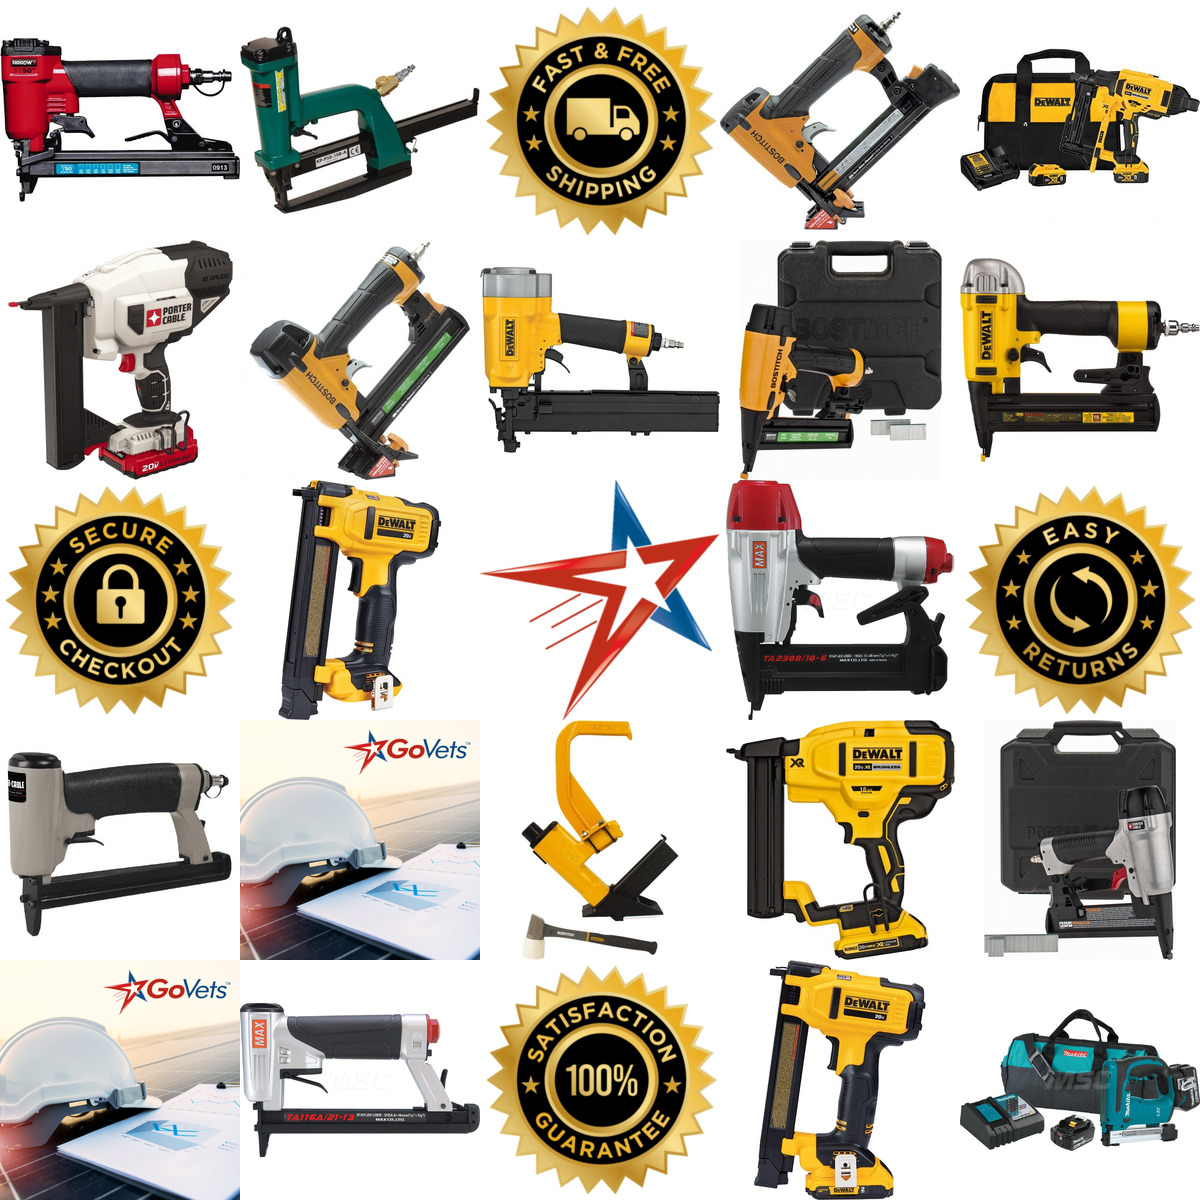 A selection of Power Staplers products on GoVets